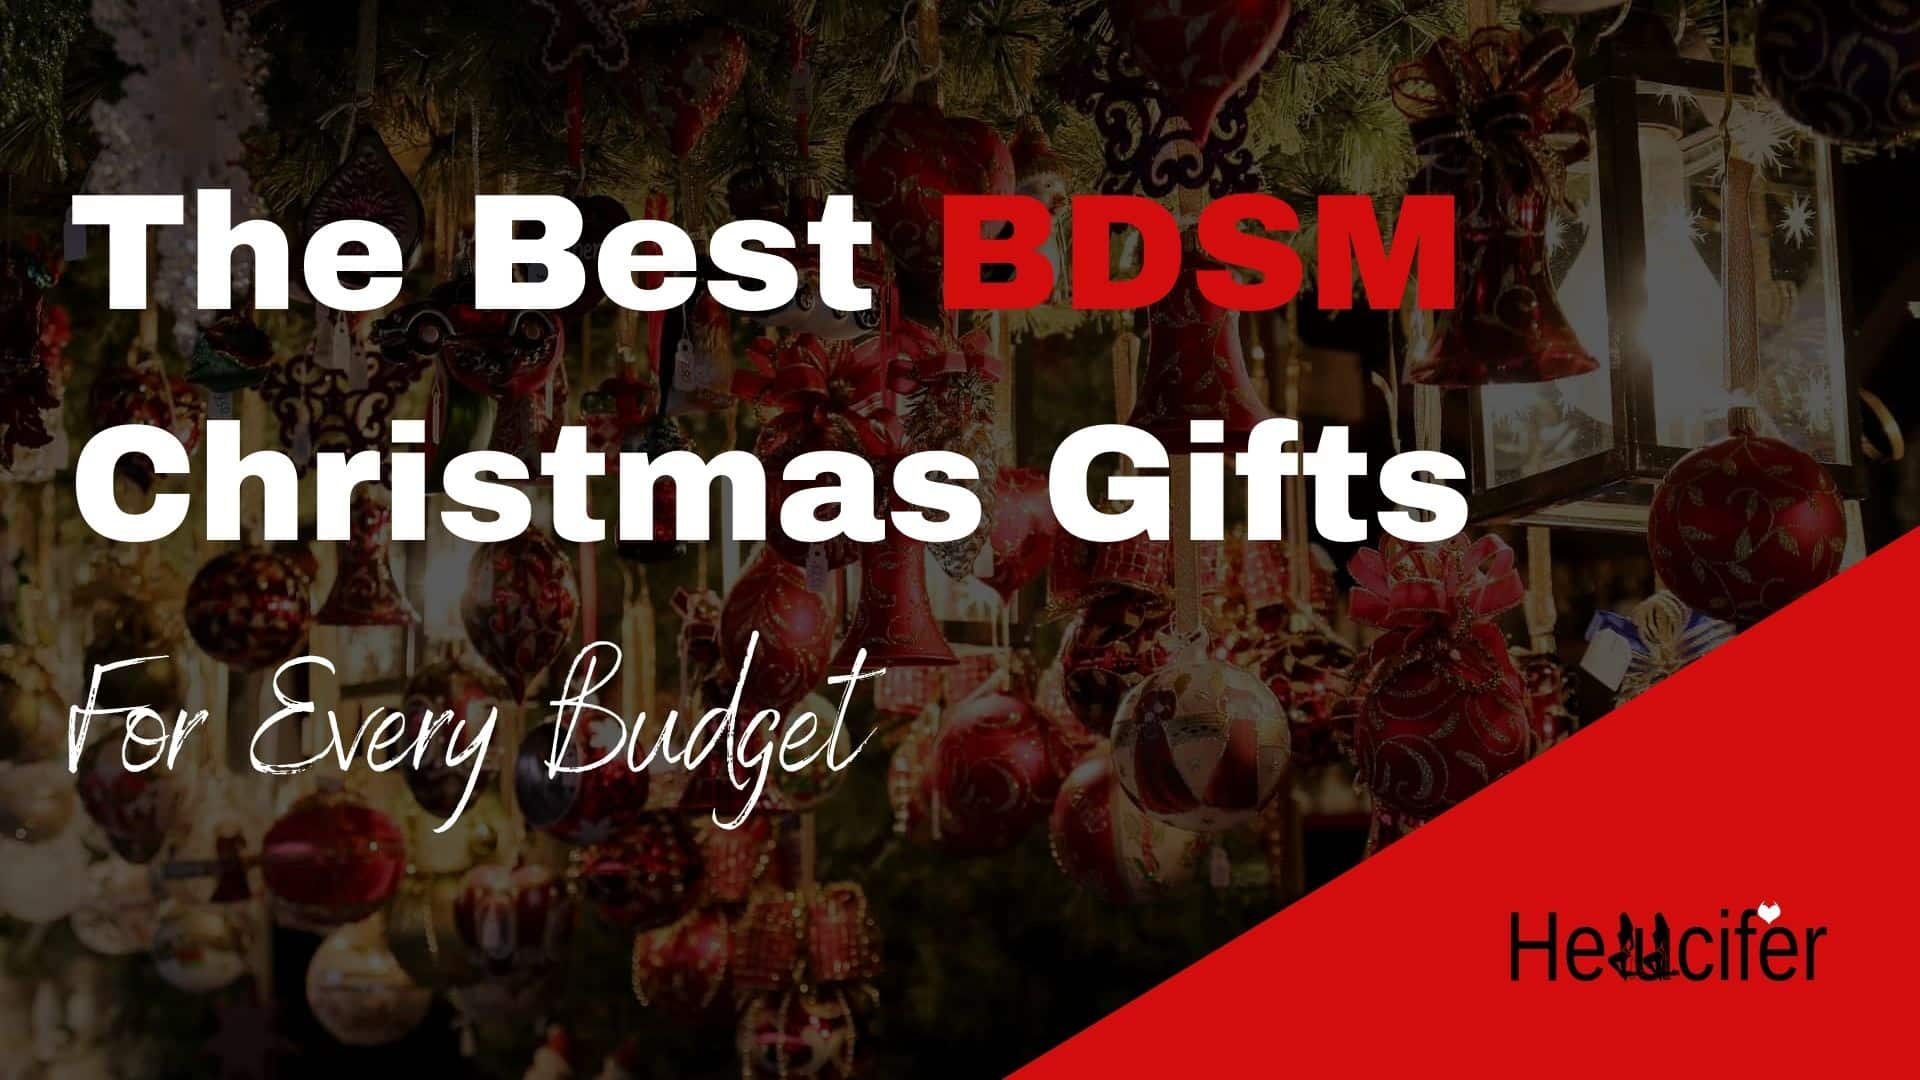 Best BDSM Christmas gifts